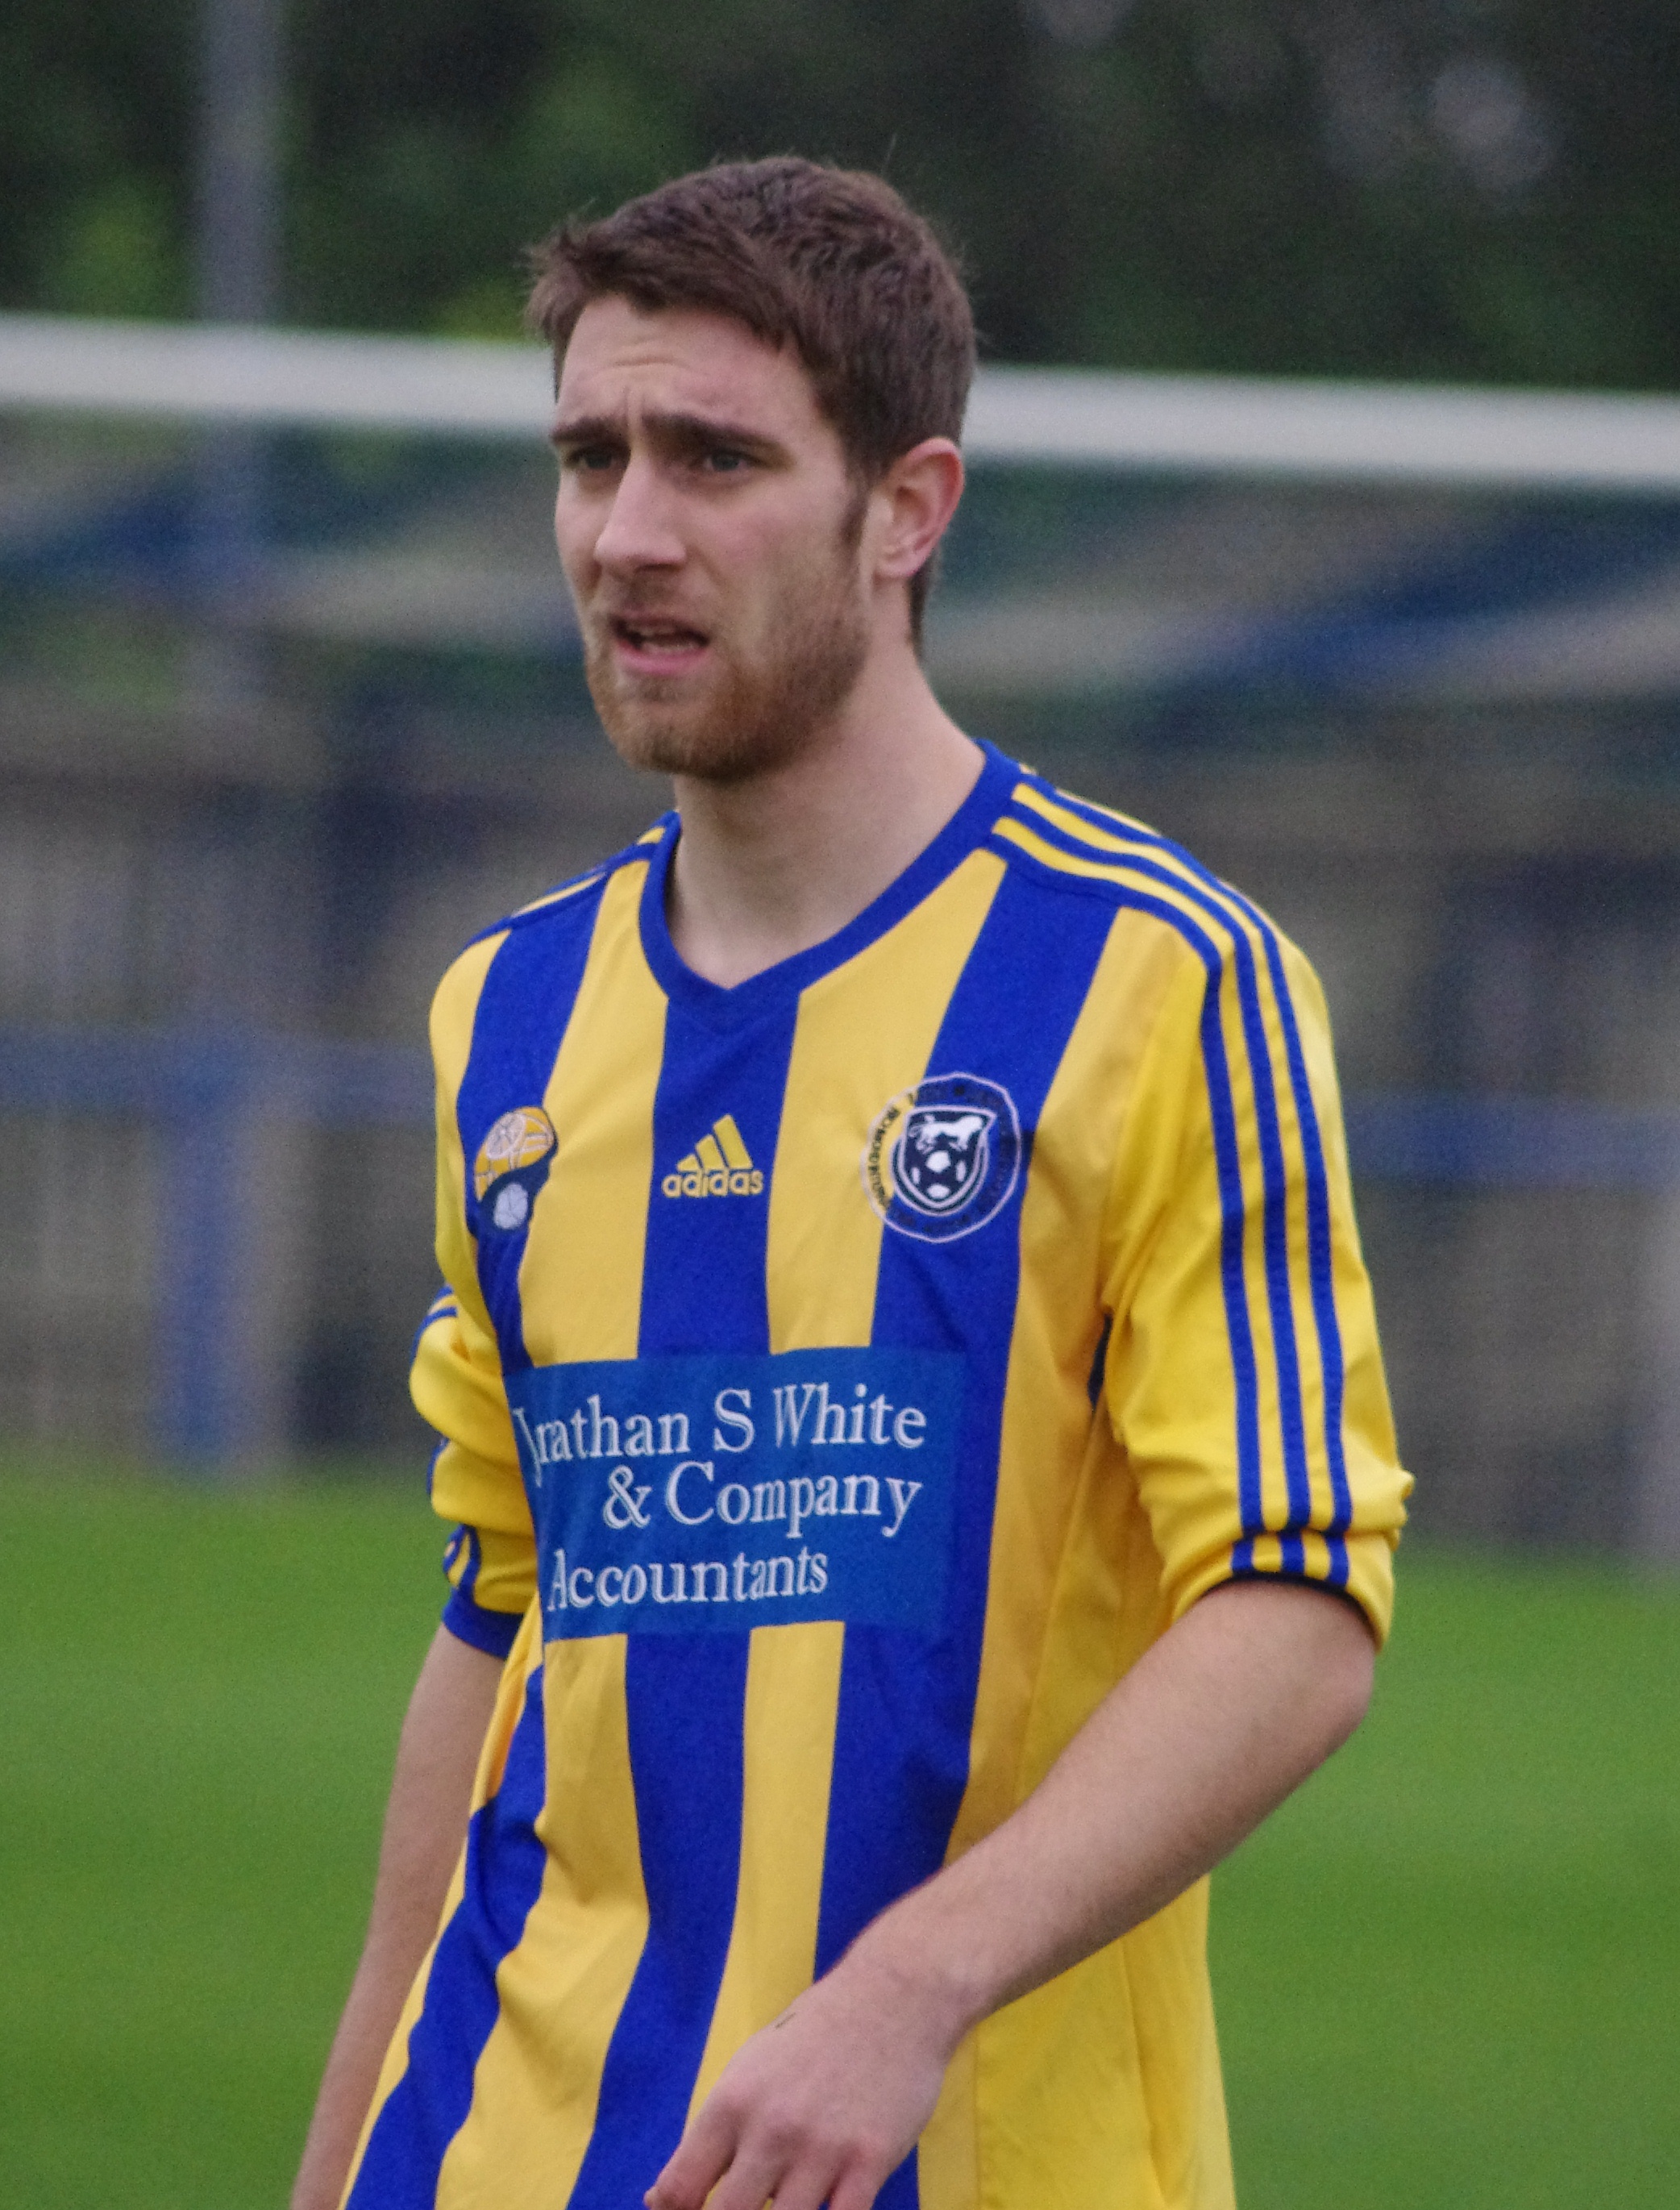 Andy Hawksworth scored the winner for Garforth against Parkgate